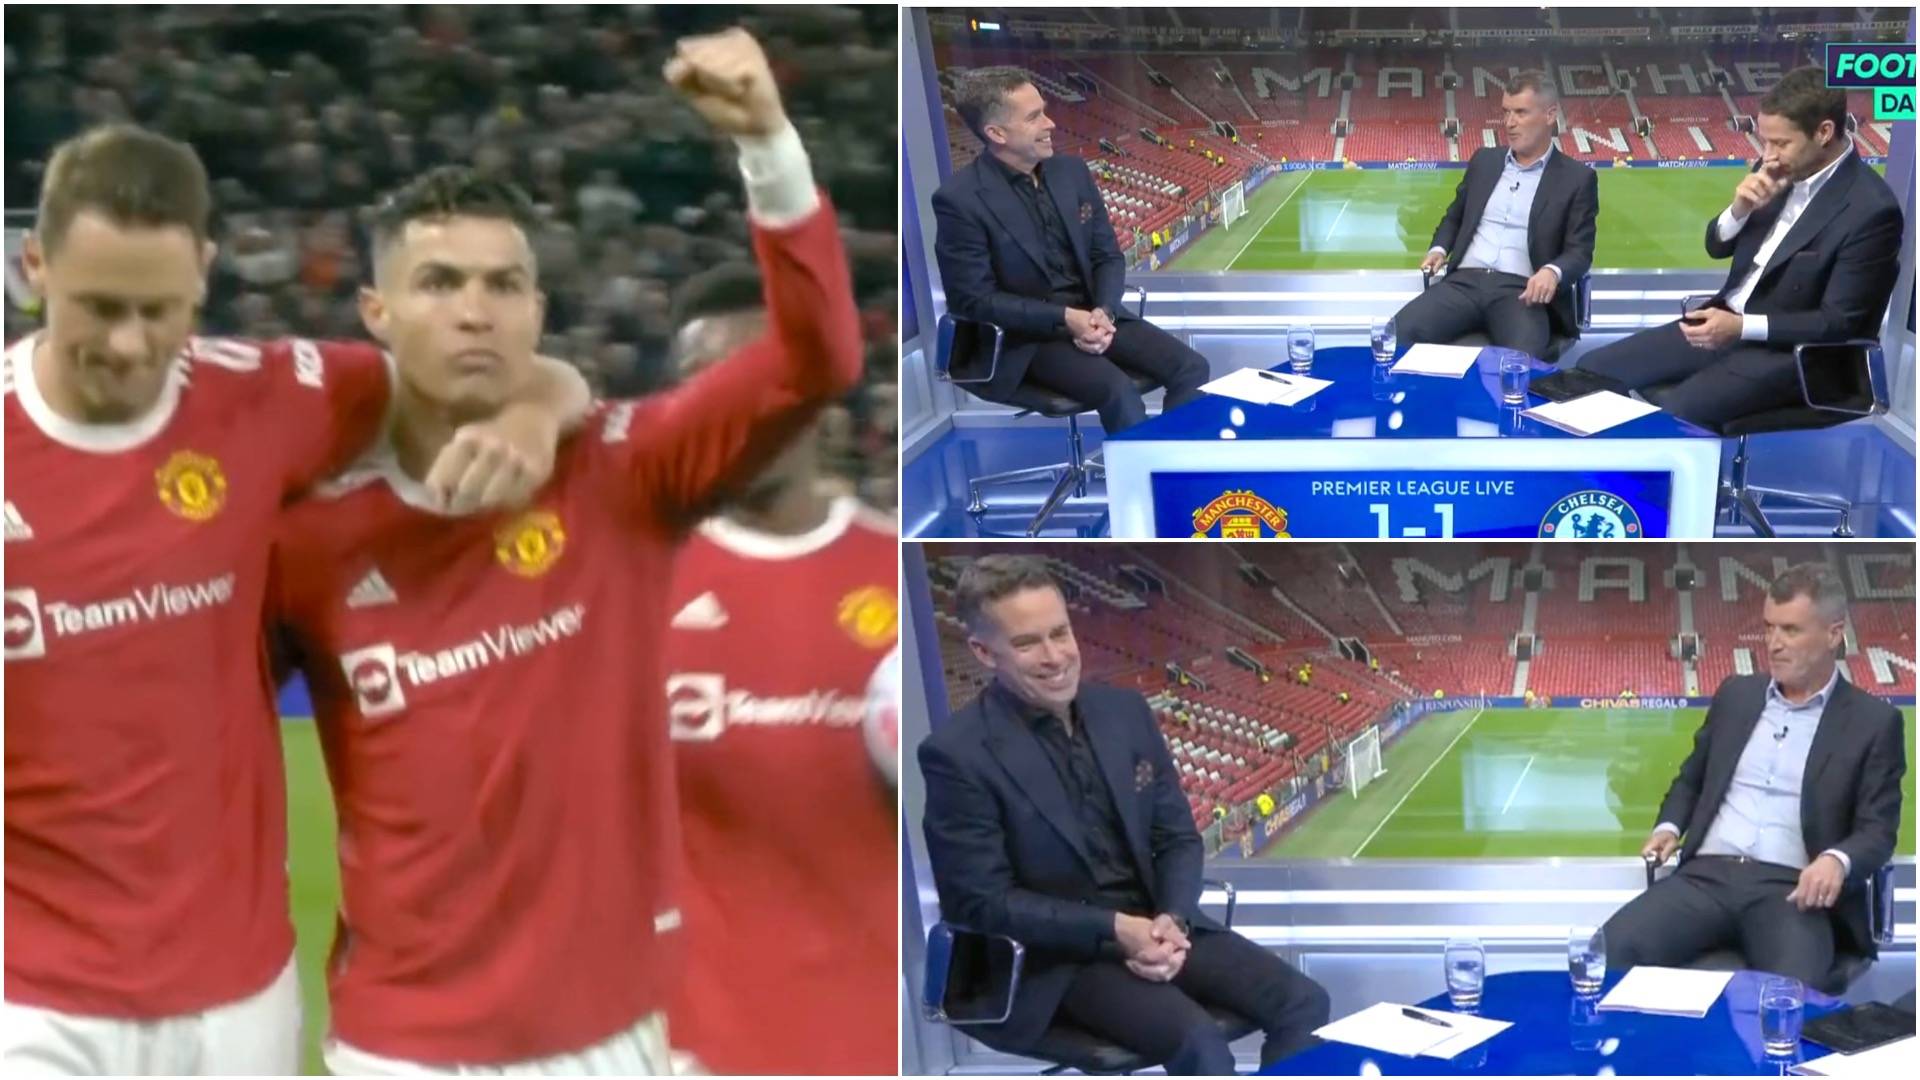 Roy Keane's sarcastic comment about Ronaldo being the problem after Man Utd 1-1 Chelsea is gold